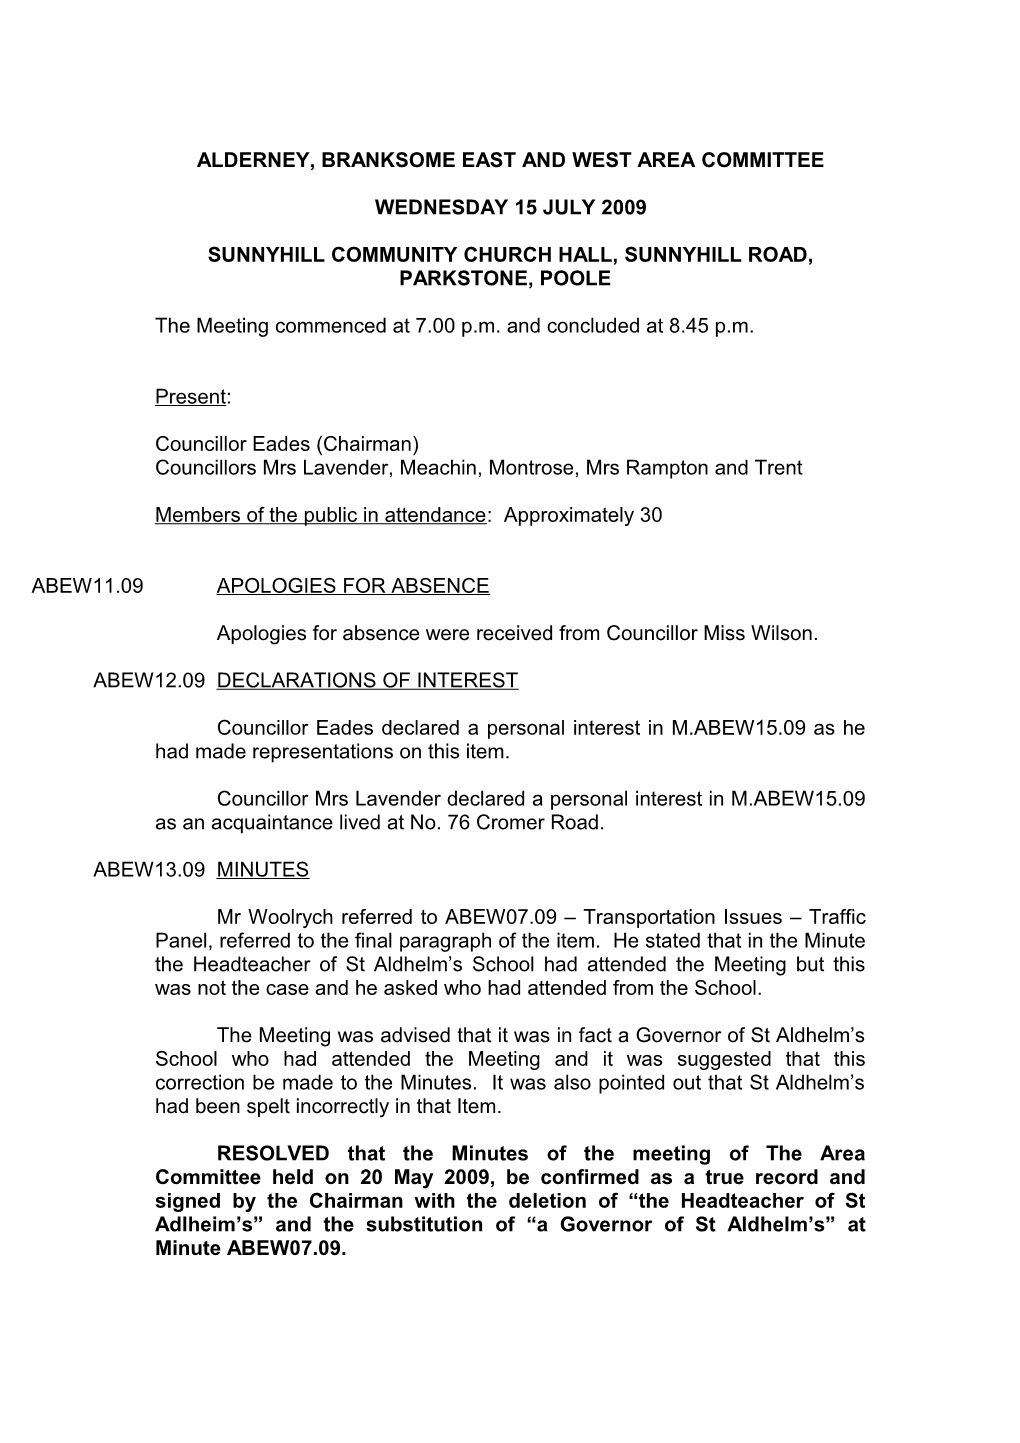 Minutes - Alderney, Branksome East and West Area Committee - 15 July 2009